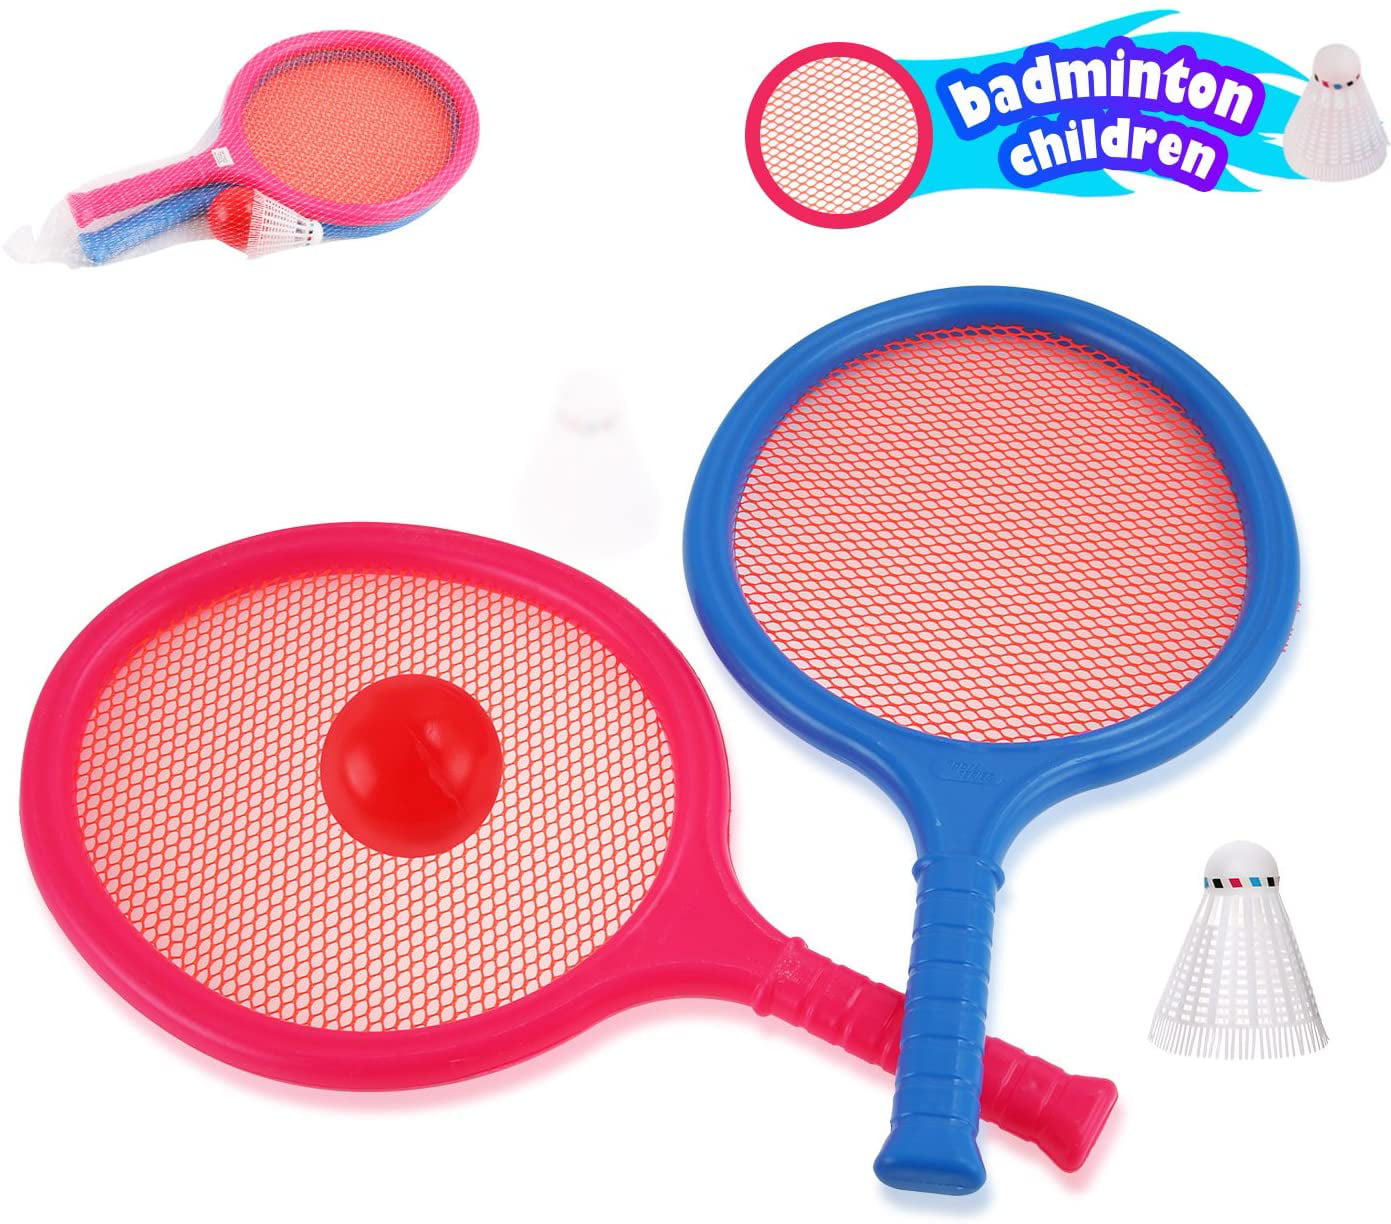 Details about   Return Ball Sports with a mixture of tennis and badminton/Ratesminton Single set 